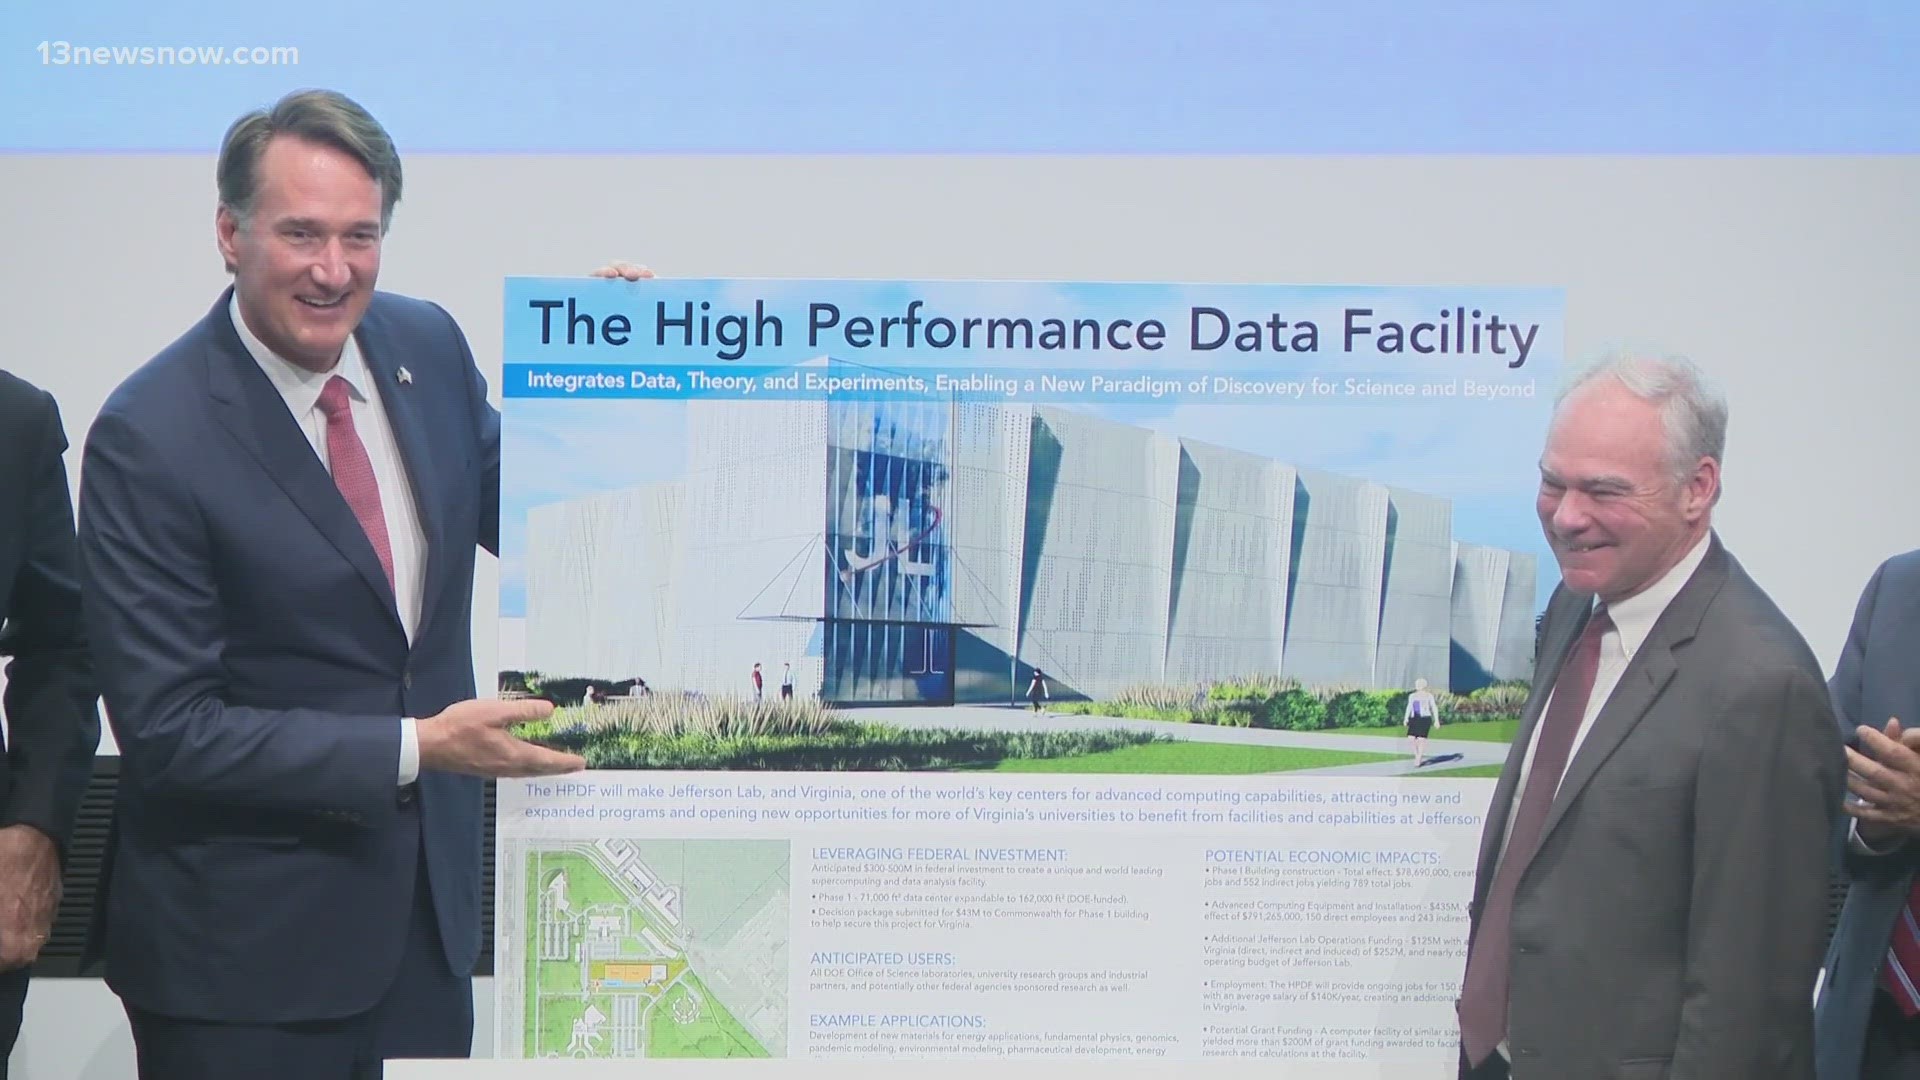 The Department of Energy selected the Jefferson Lab in Newport News to lead and develop a new high-performance data facility at its site.